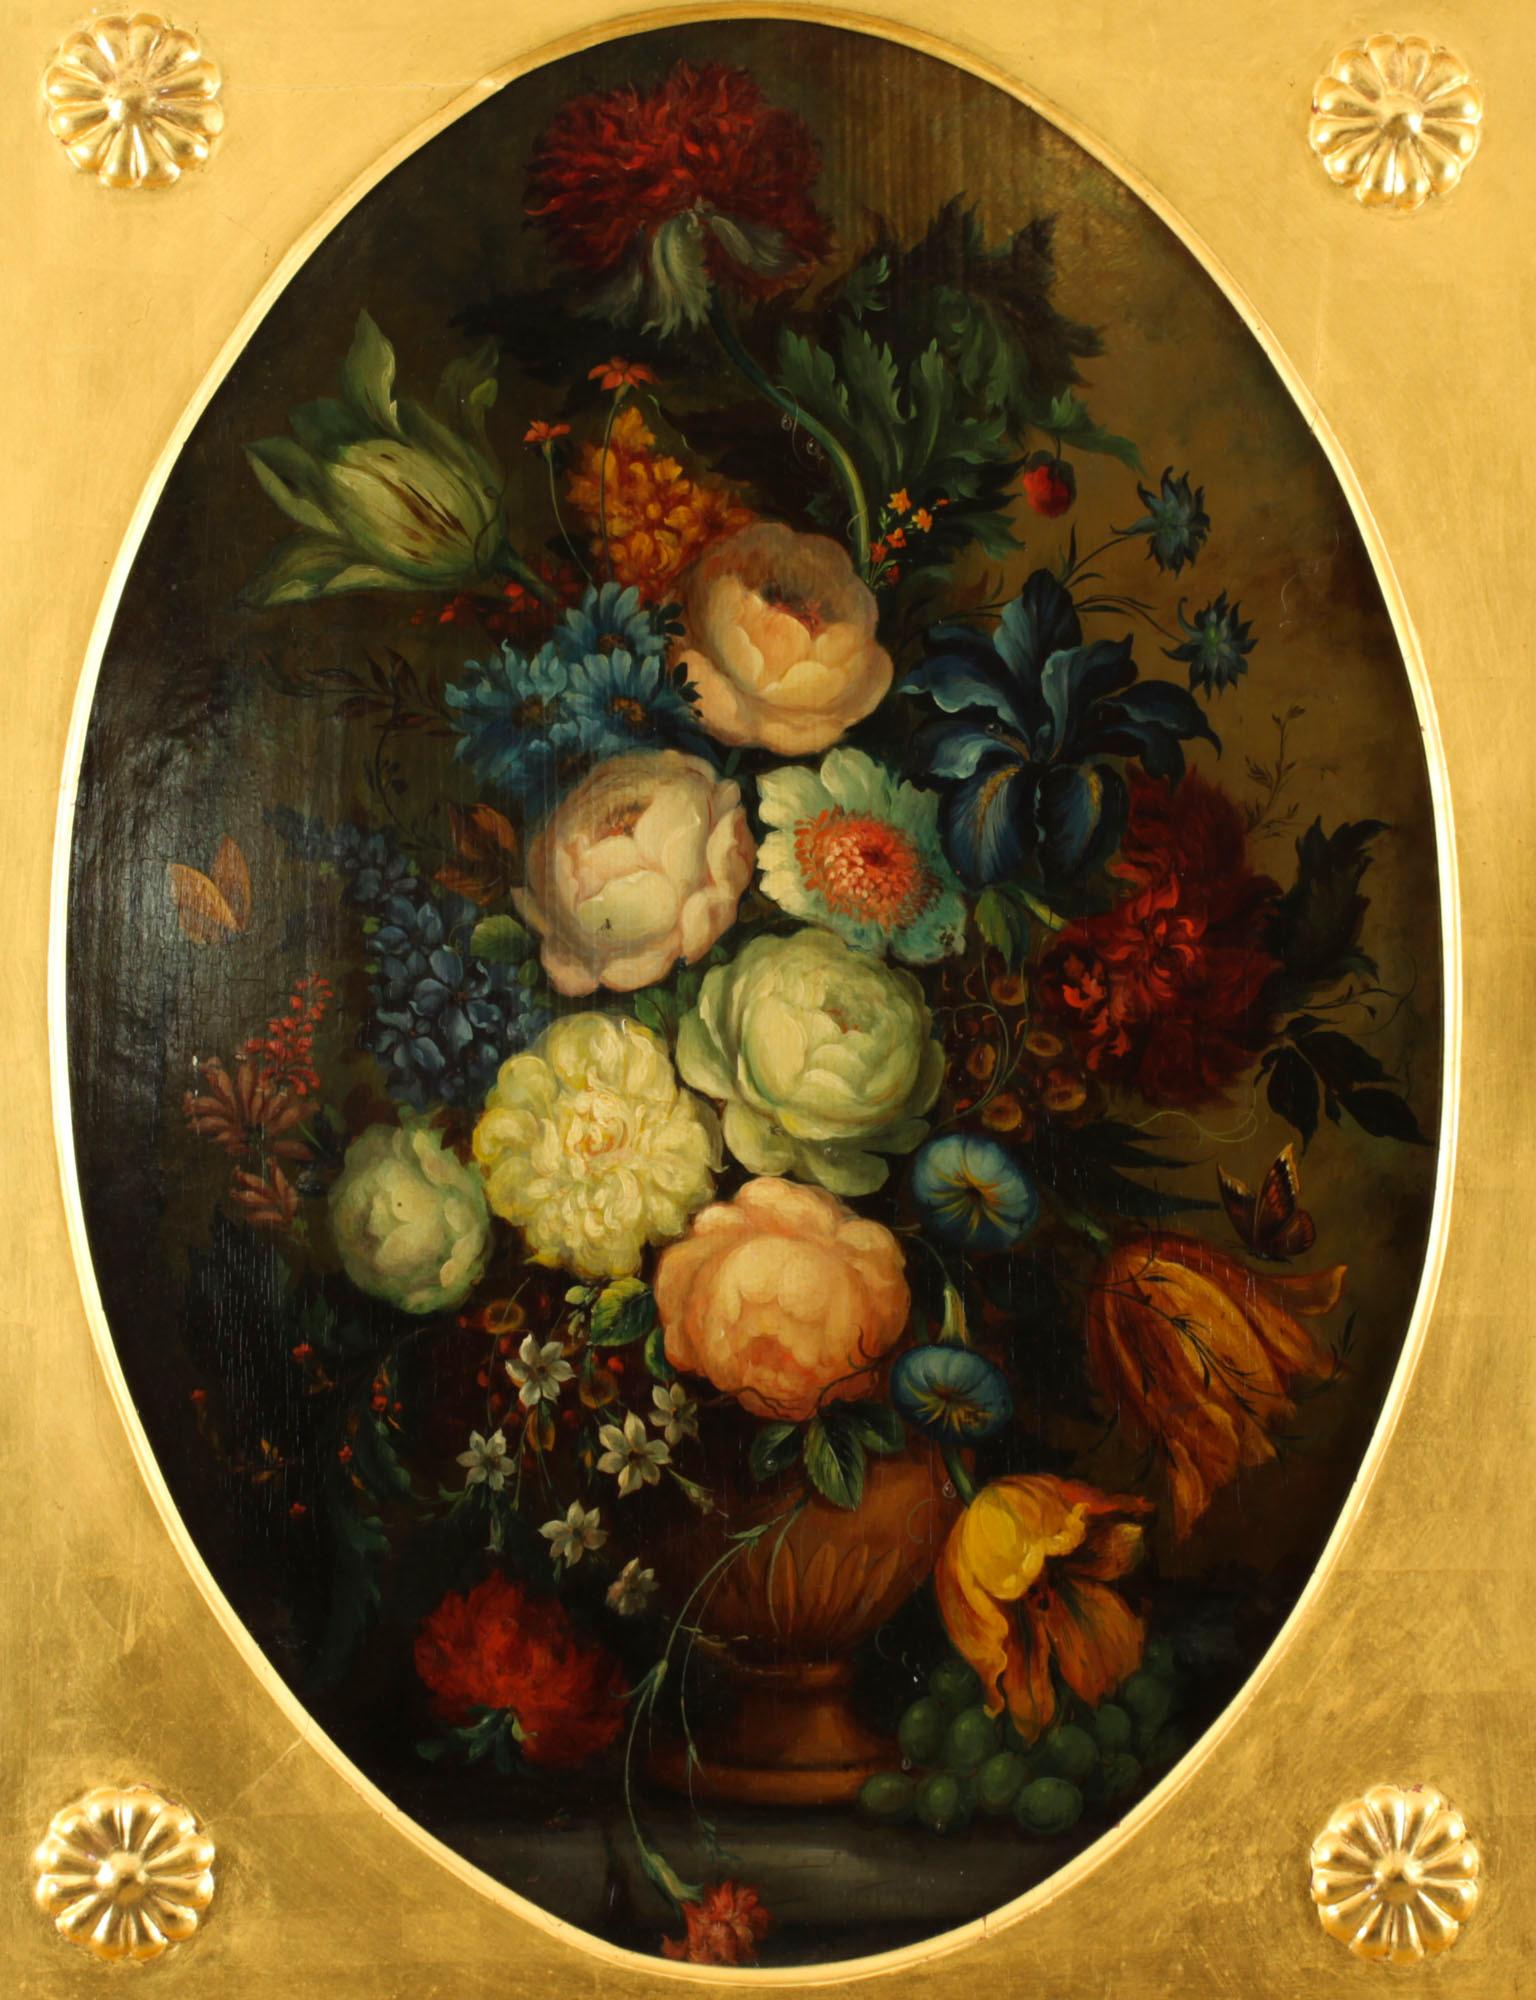 This is a beautiful English School antique oil on panel paintings of a still life, 19th century in date.

The oil on panel painting depdicts a beautiful still life of roses, irises, butterflies and other flowers in an urn. It is signed indistinctly